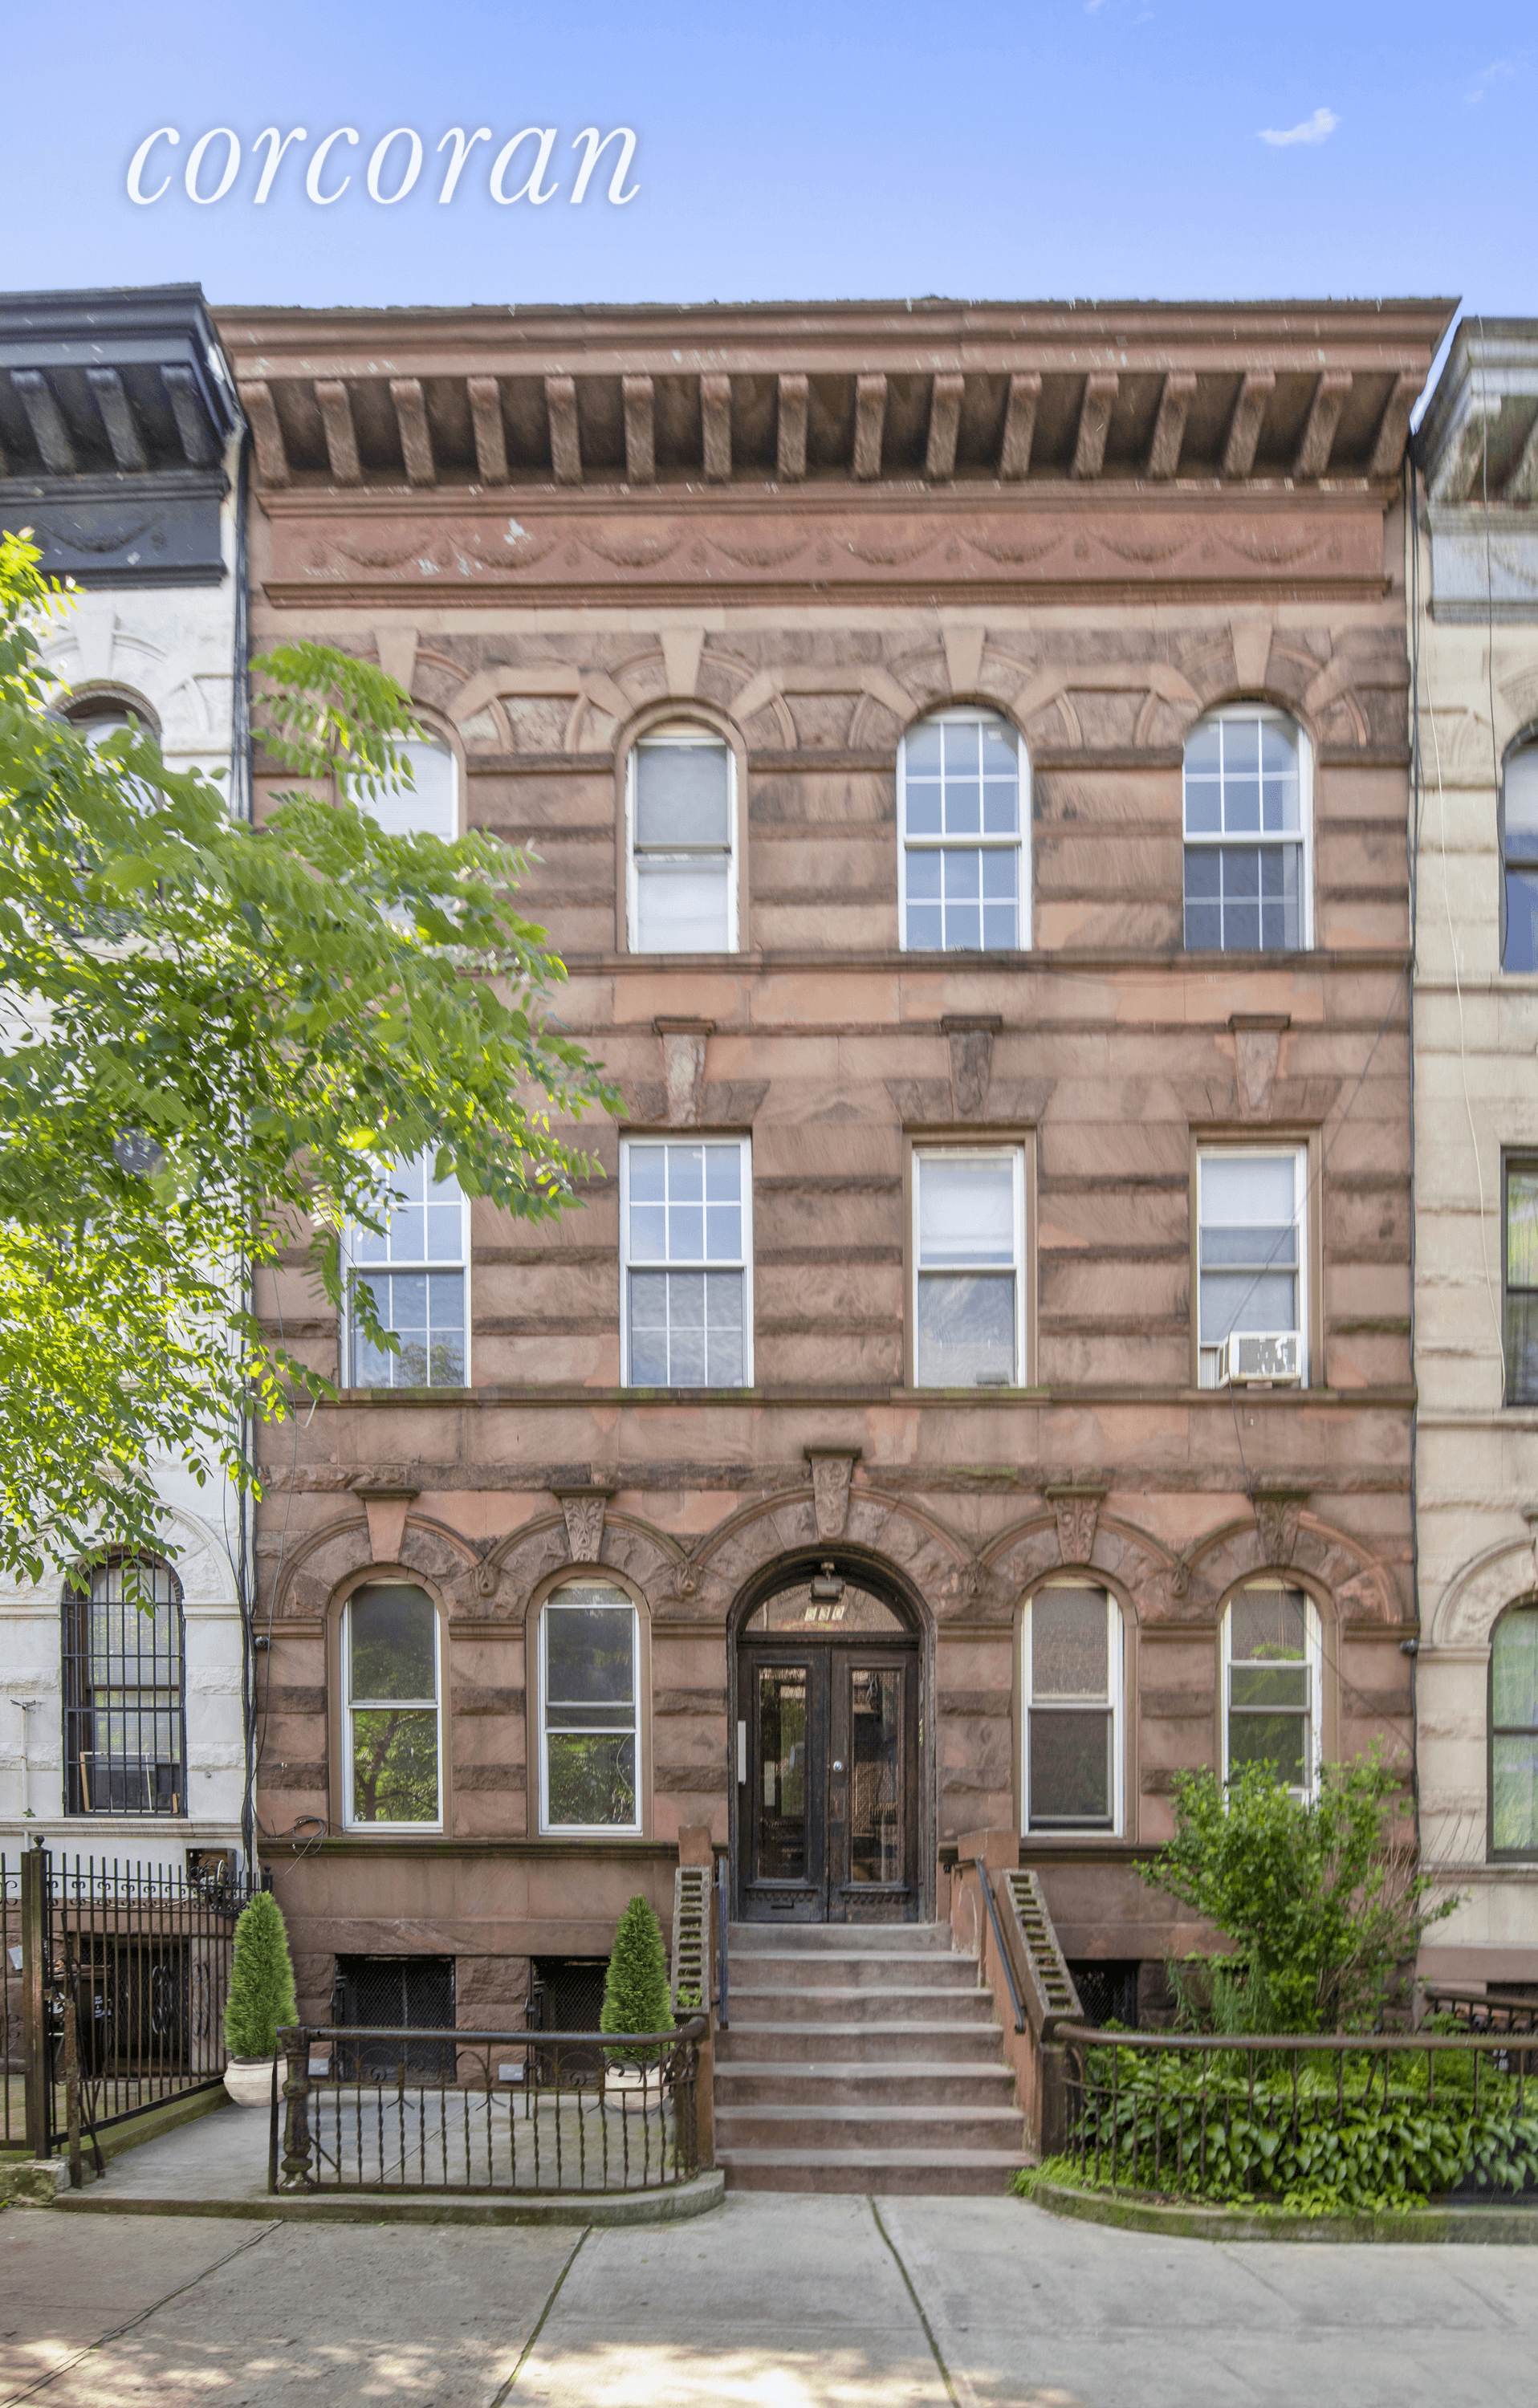 Introducing 530 Chauncey Street, an expansive 6 family brownstone with huge upside potential in an unbeatable location in Ocean Hill.